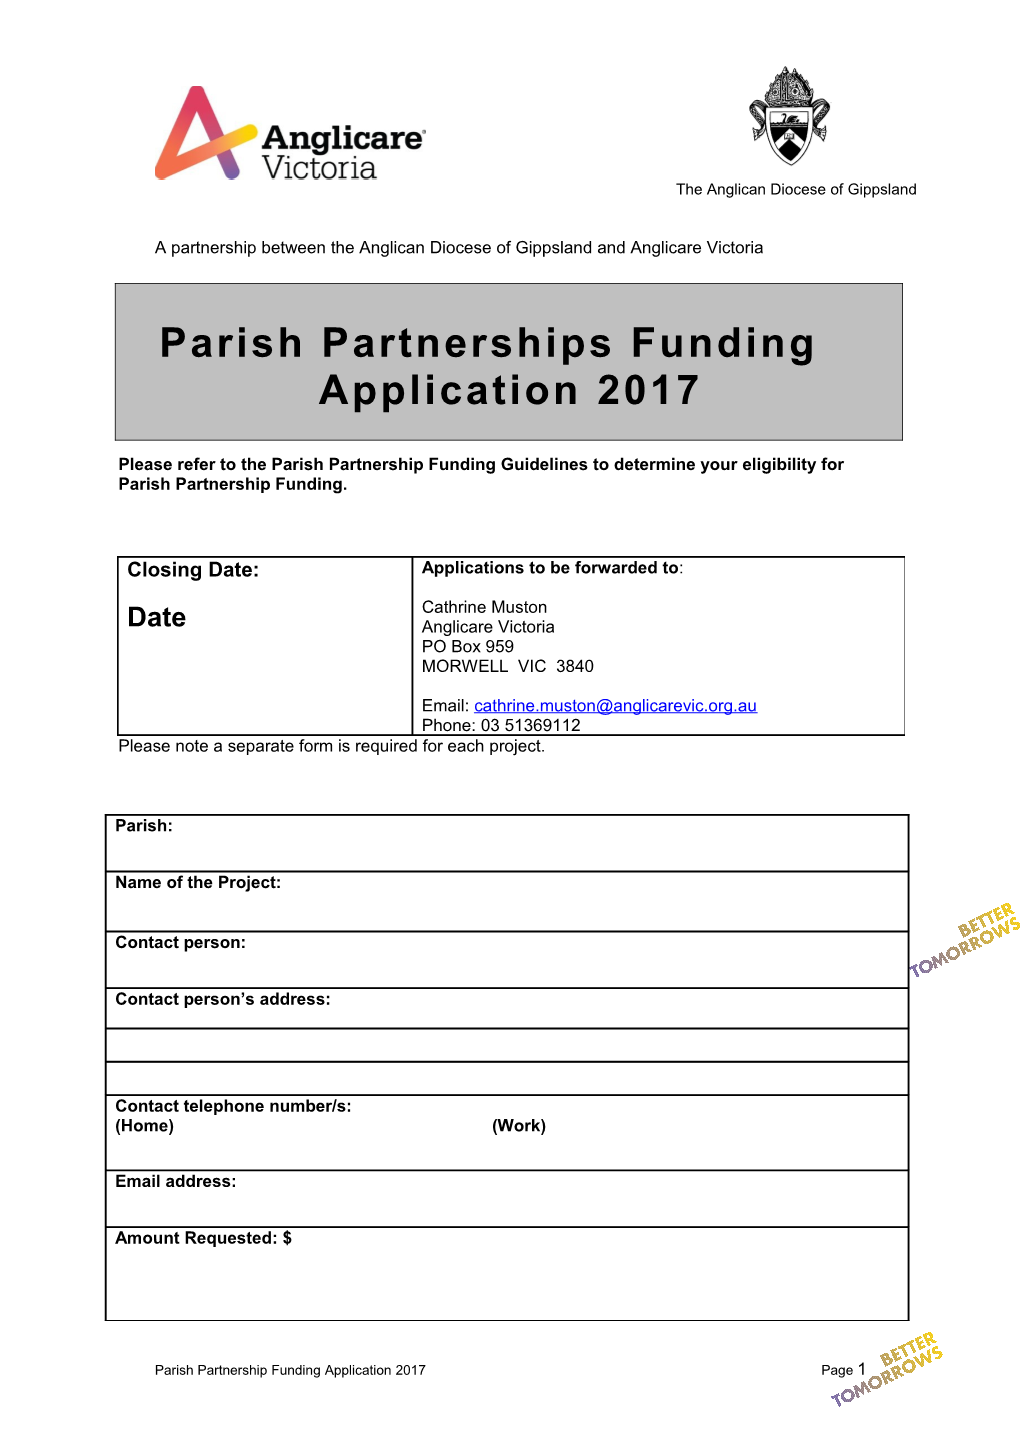 Please Refer to the Parish Partnership Funding Guidelines to Determine Your Eligibility For